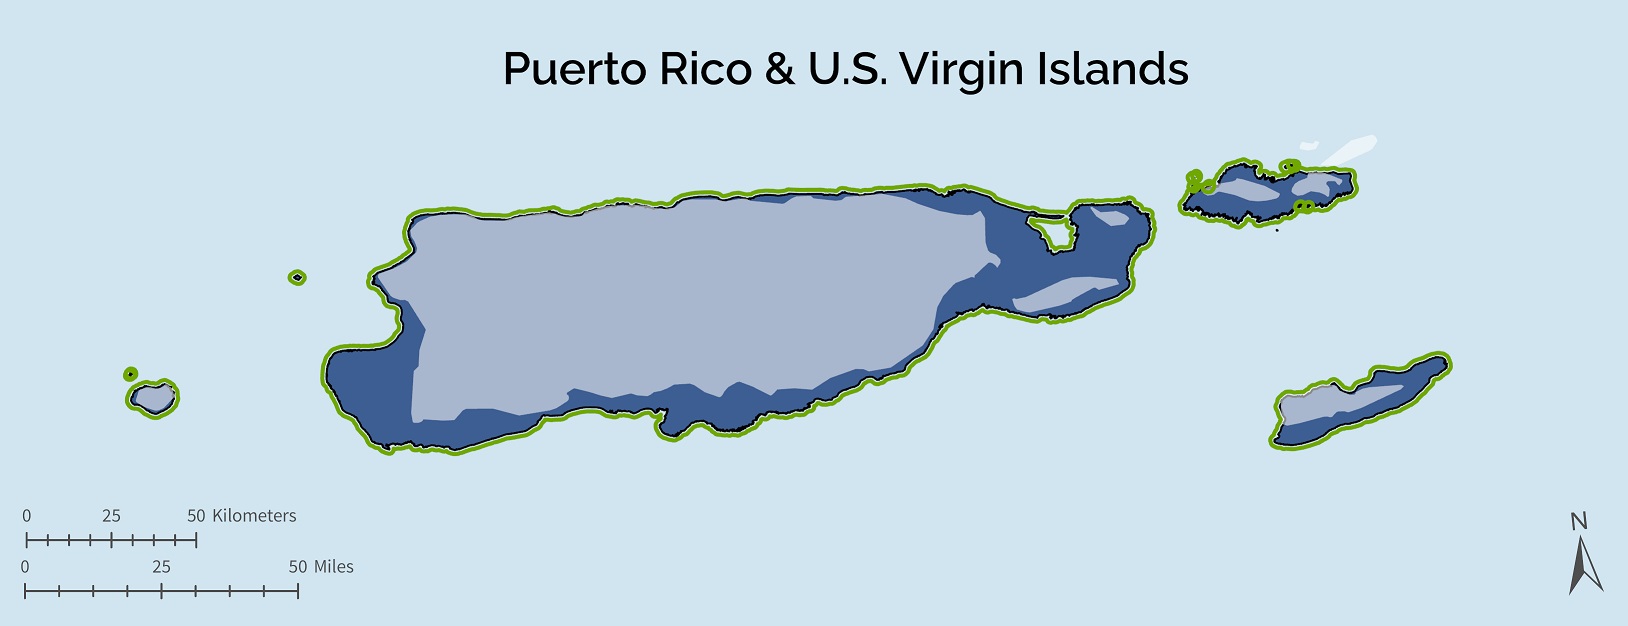 A map depicting the area covered by each U.S. Caribbean workshop